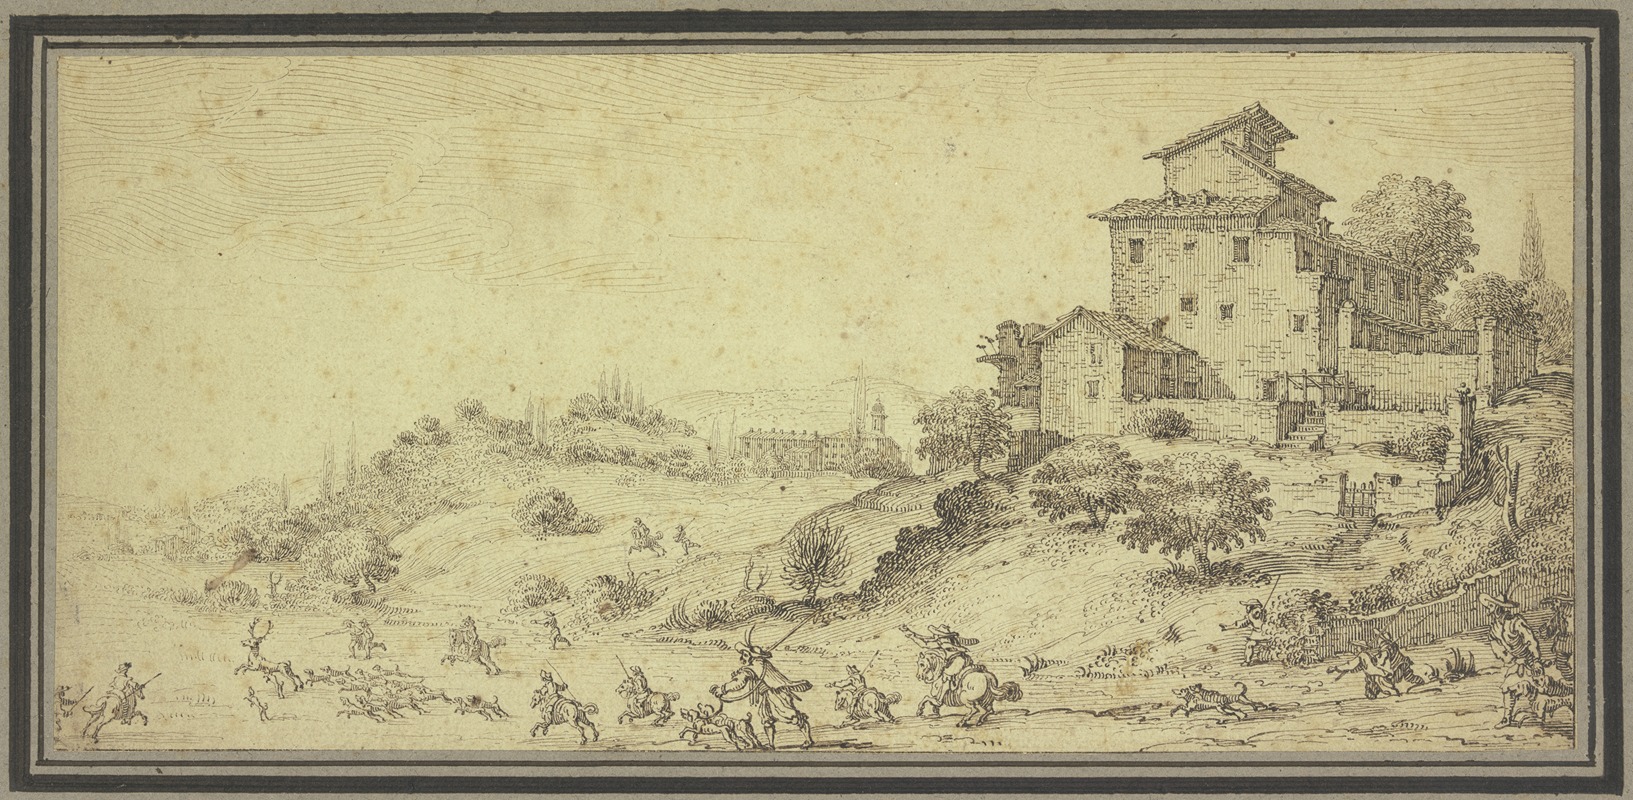 Jacques Callot - Landscape with stag hunt